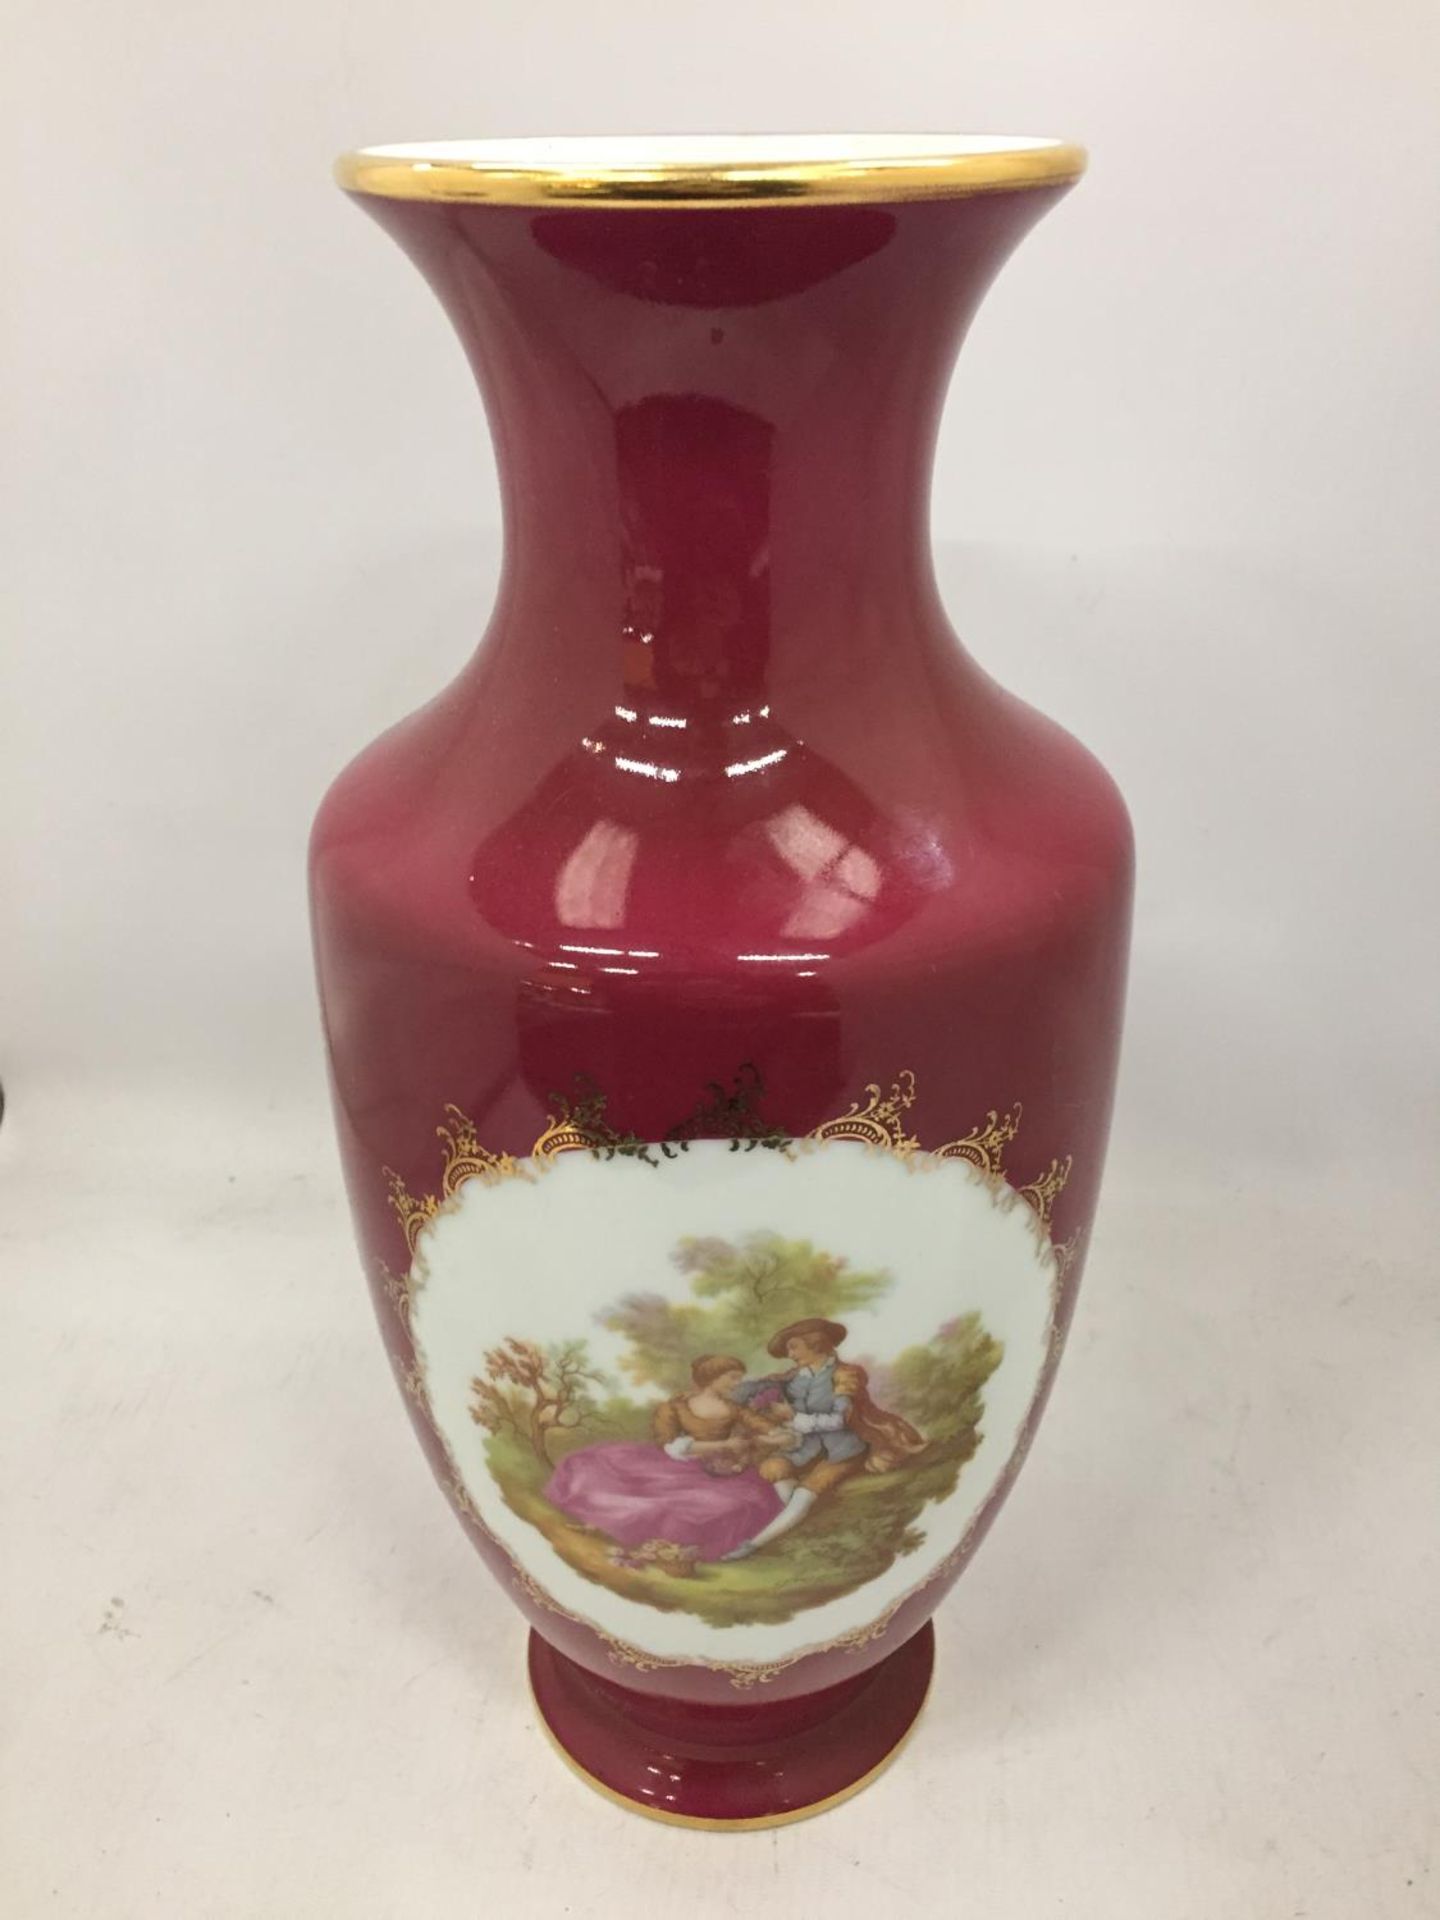 A LARGE LIMOGES CASTEL VASE WITH CLASSICAL DECORATION HEIGHT 35.5CM